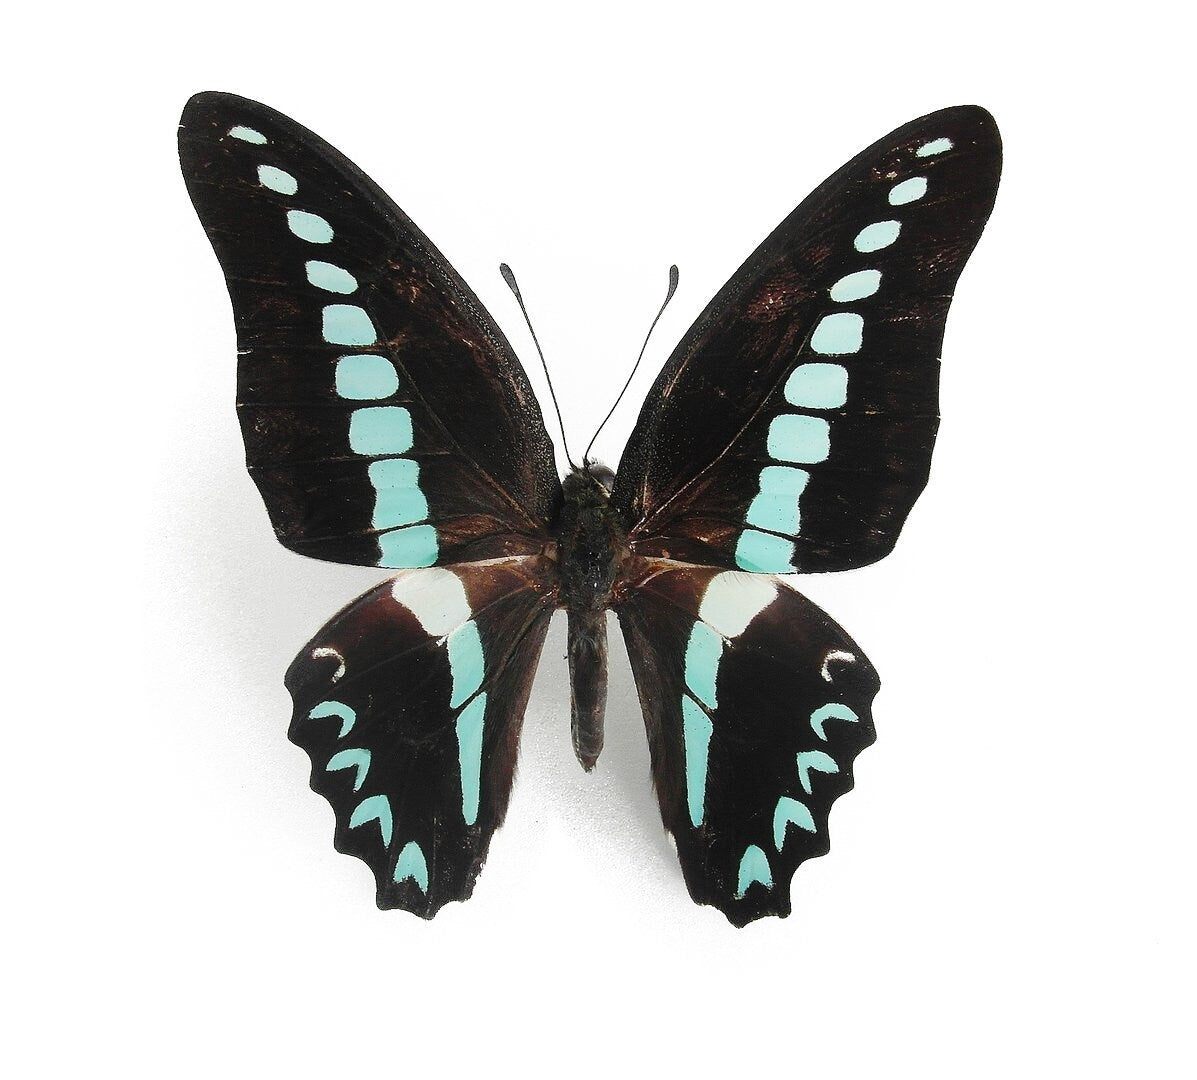 Milon's Swallowtail Butterfly Graphium milon anthedon Male Spread or Folded Real Insect Taxidermy